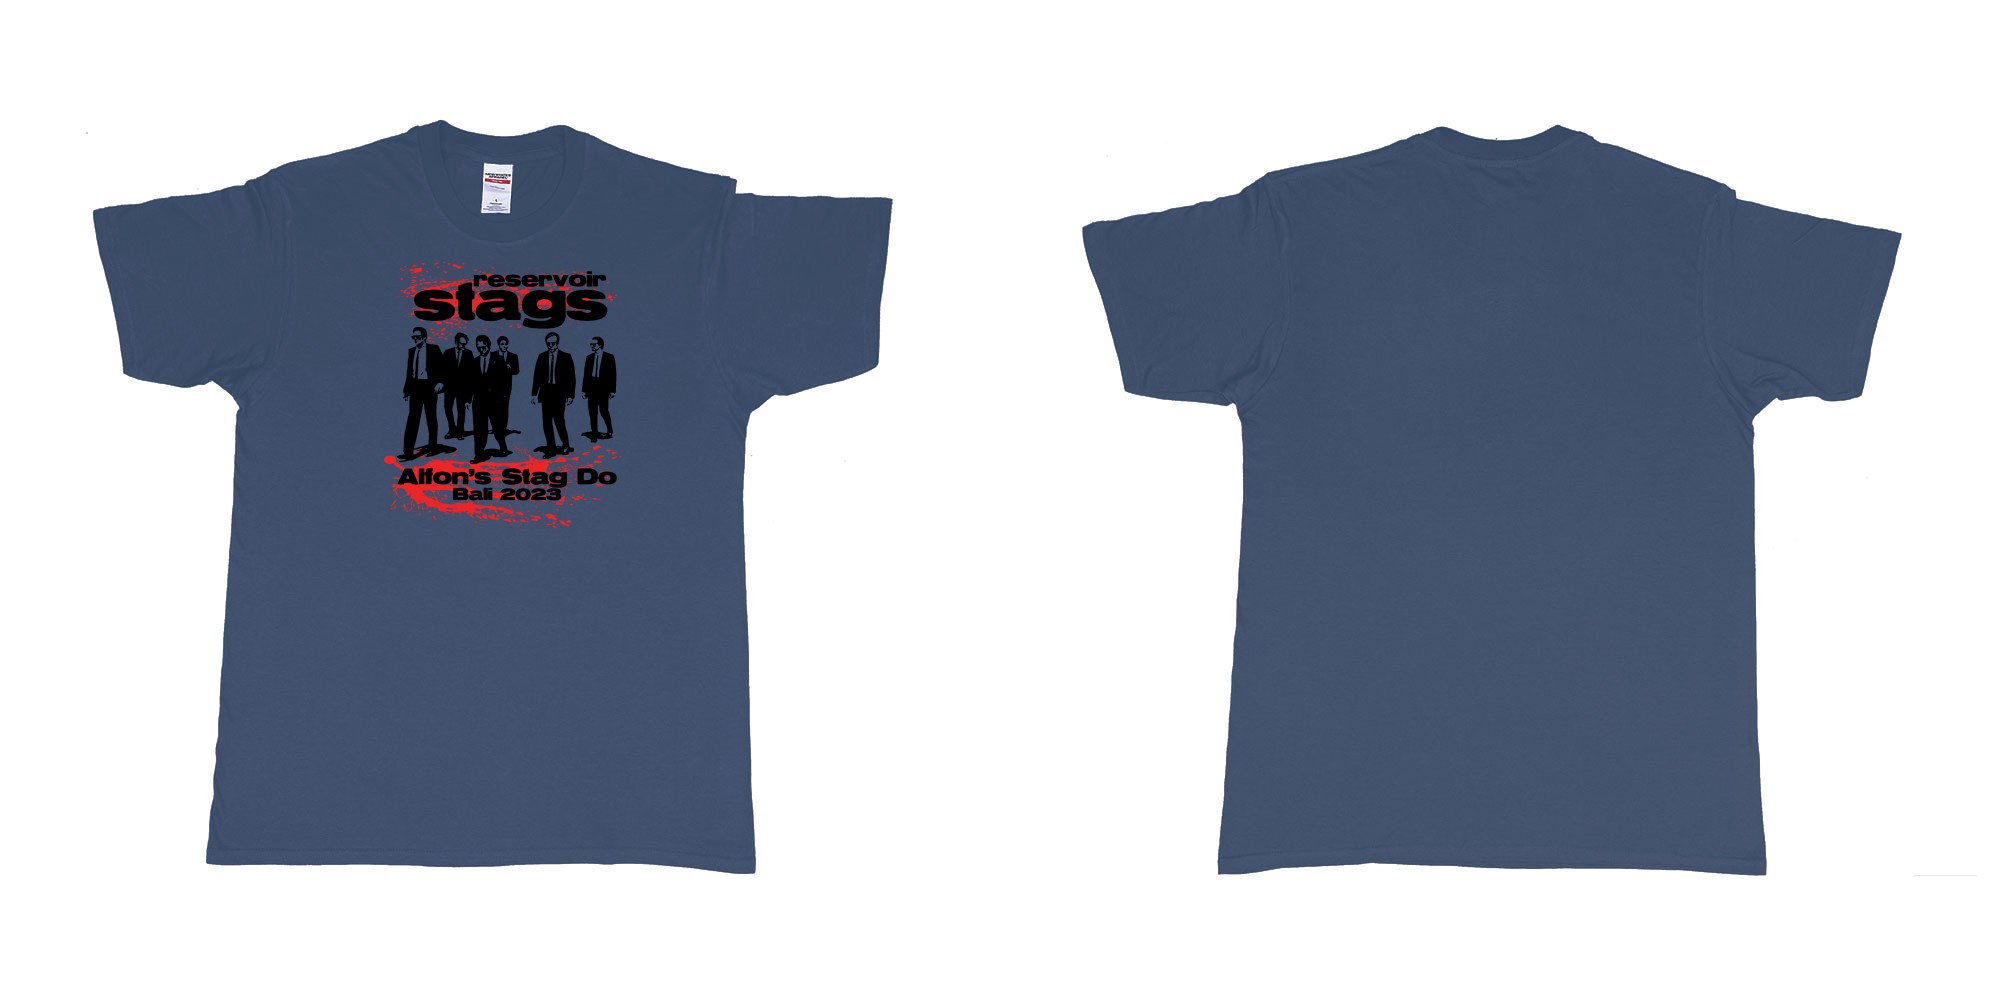 Custom tshirt design Reservoir Dogs Stag in fabric color navy choice your own text made in Bali by The Pirate Way